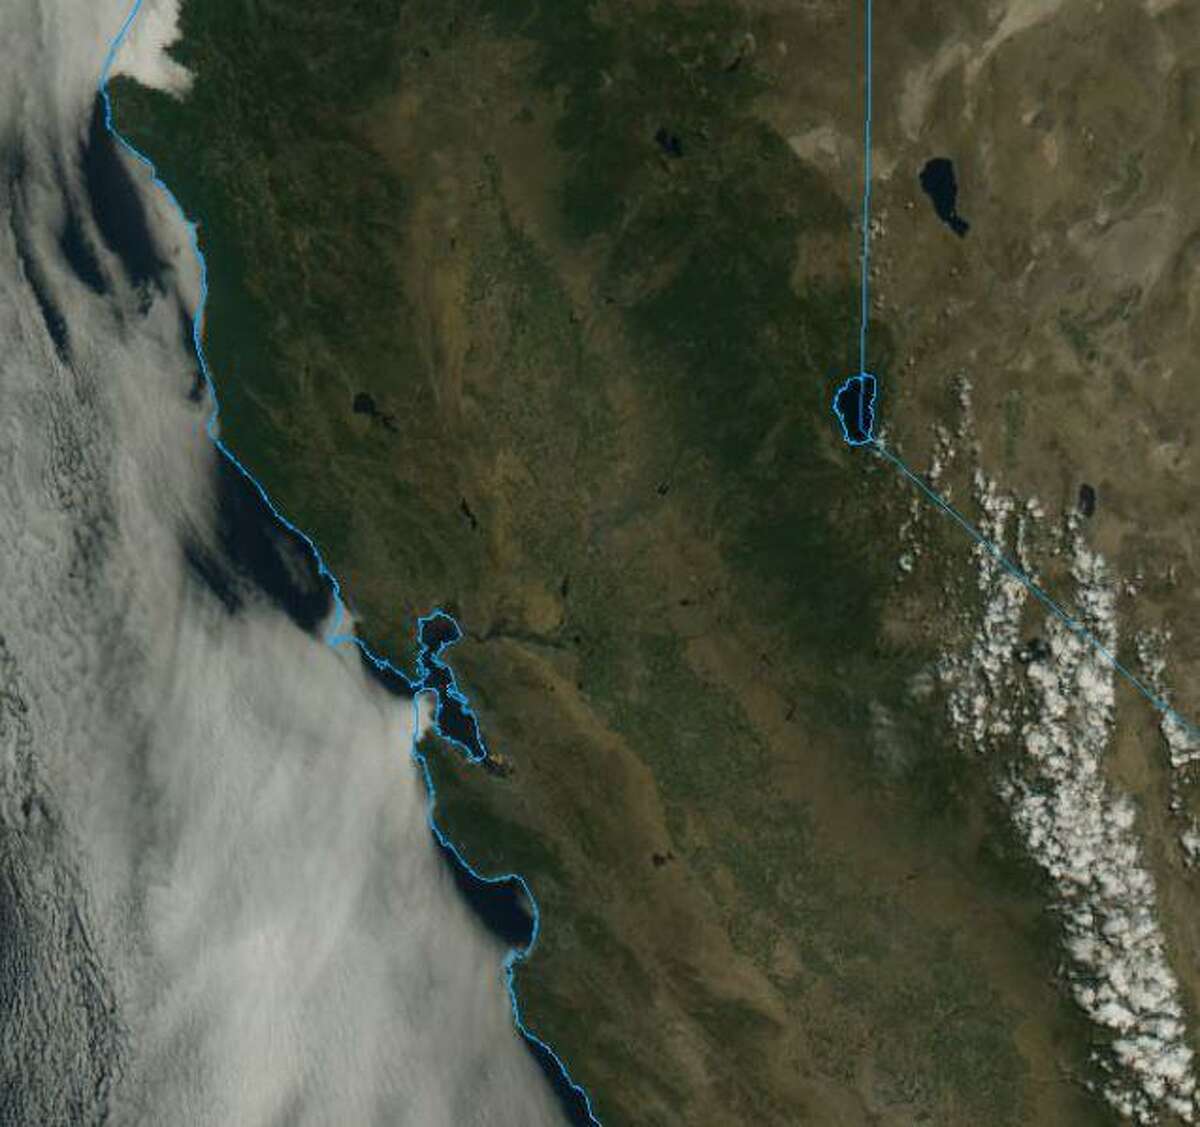 Friday morning satellite imagery shows a patch of fog shielding San Francisco from the scorching hot weather in the rest of the Golden State.